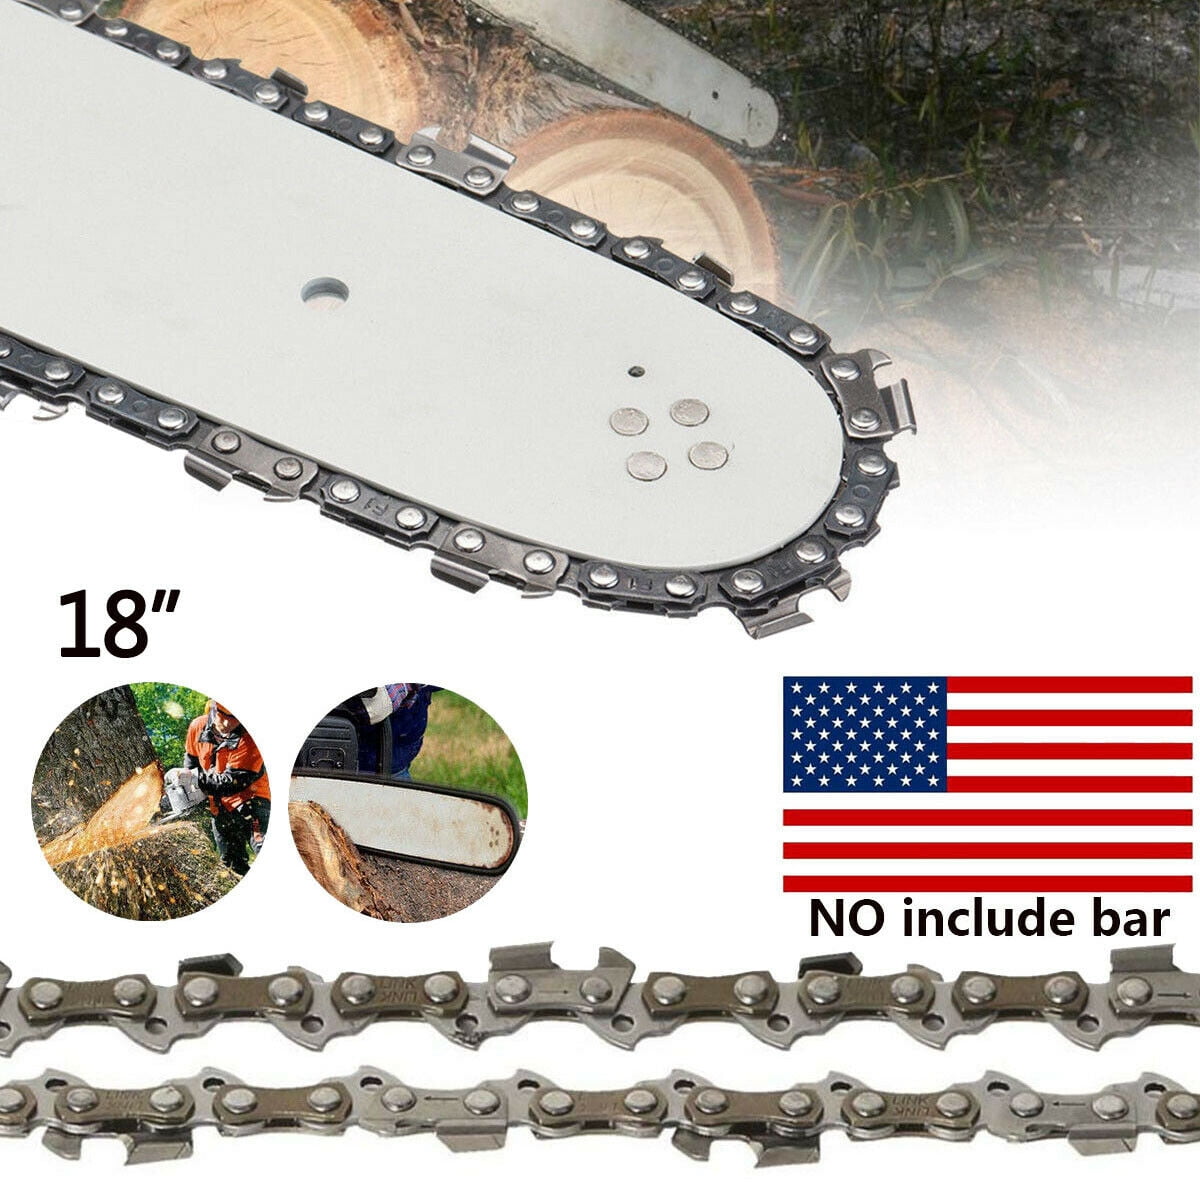 18” Chainsaw Saw Chain Blade 0.325" Pitch .050" Gauge 72 DL Replacement 